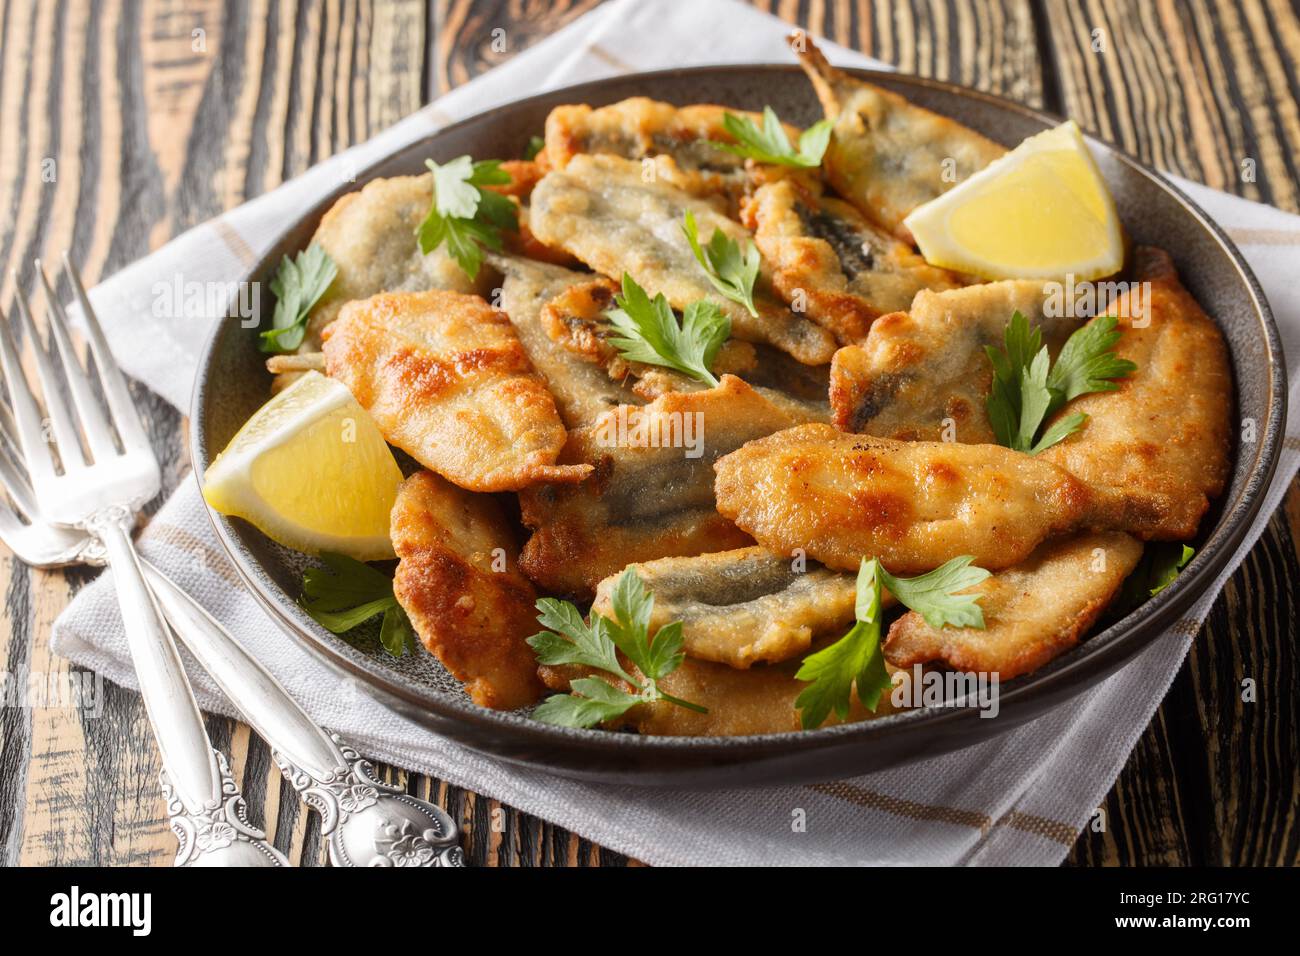 Plate of deep fried anchovies with lemon closeup on the table. Horizontal Stock Photo